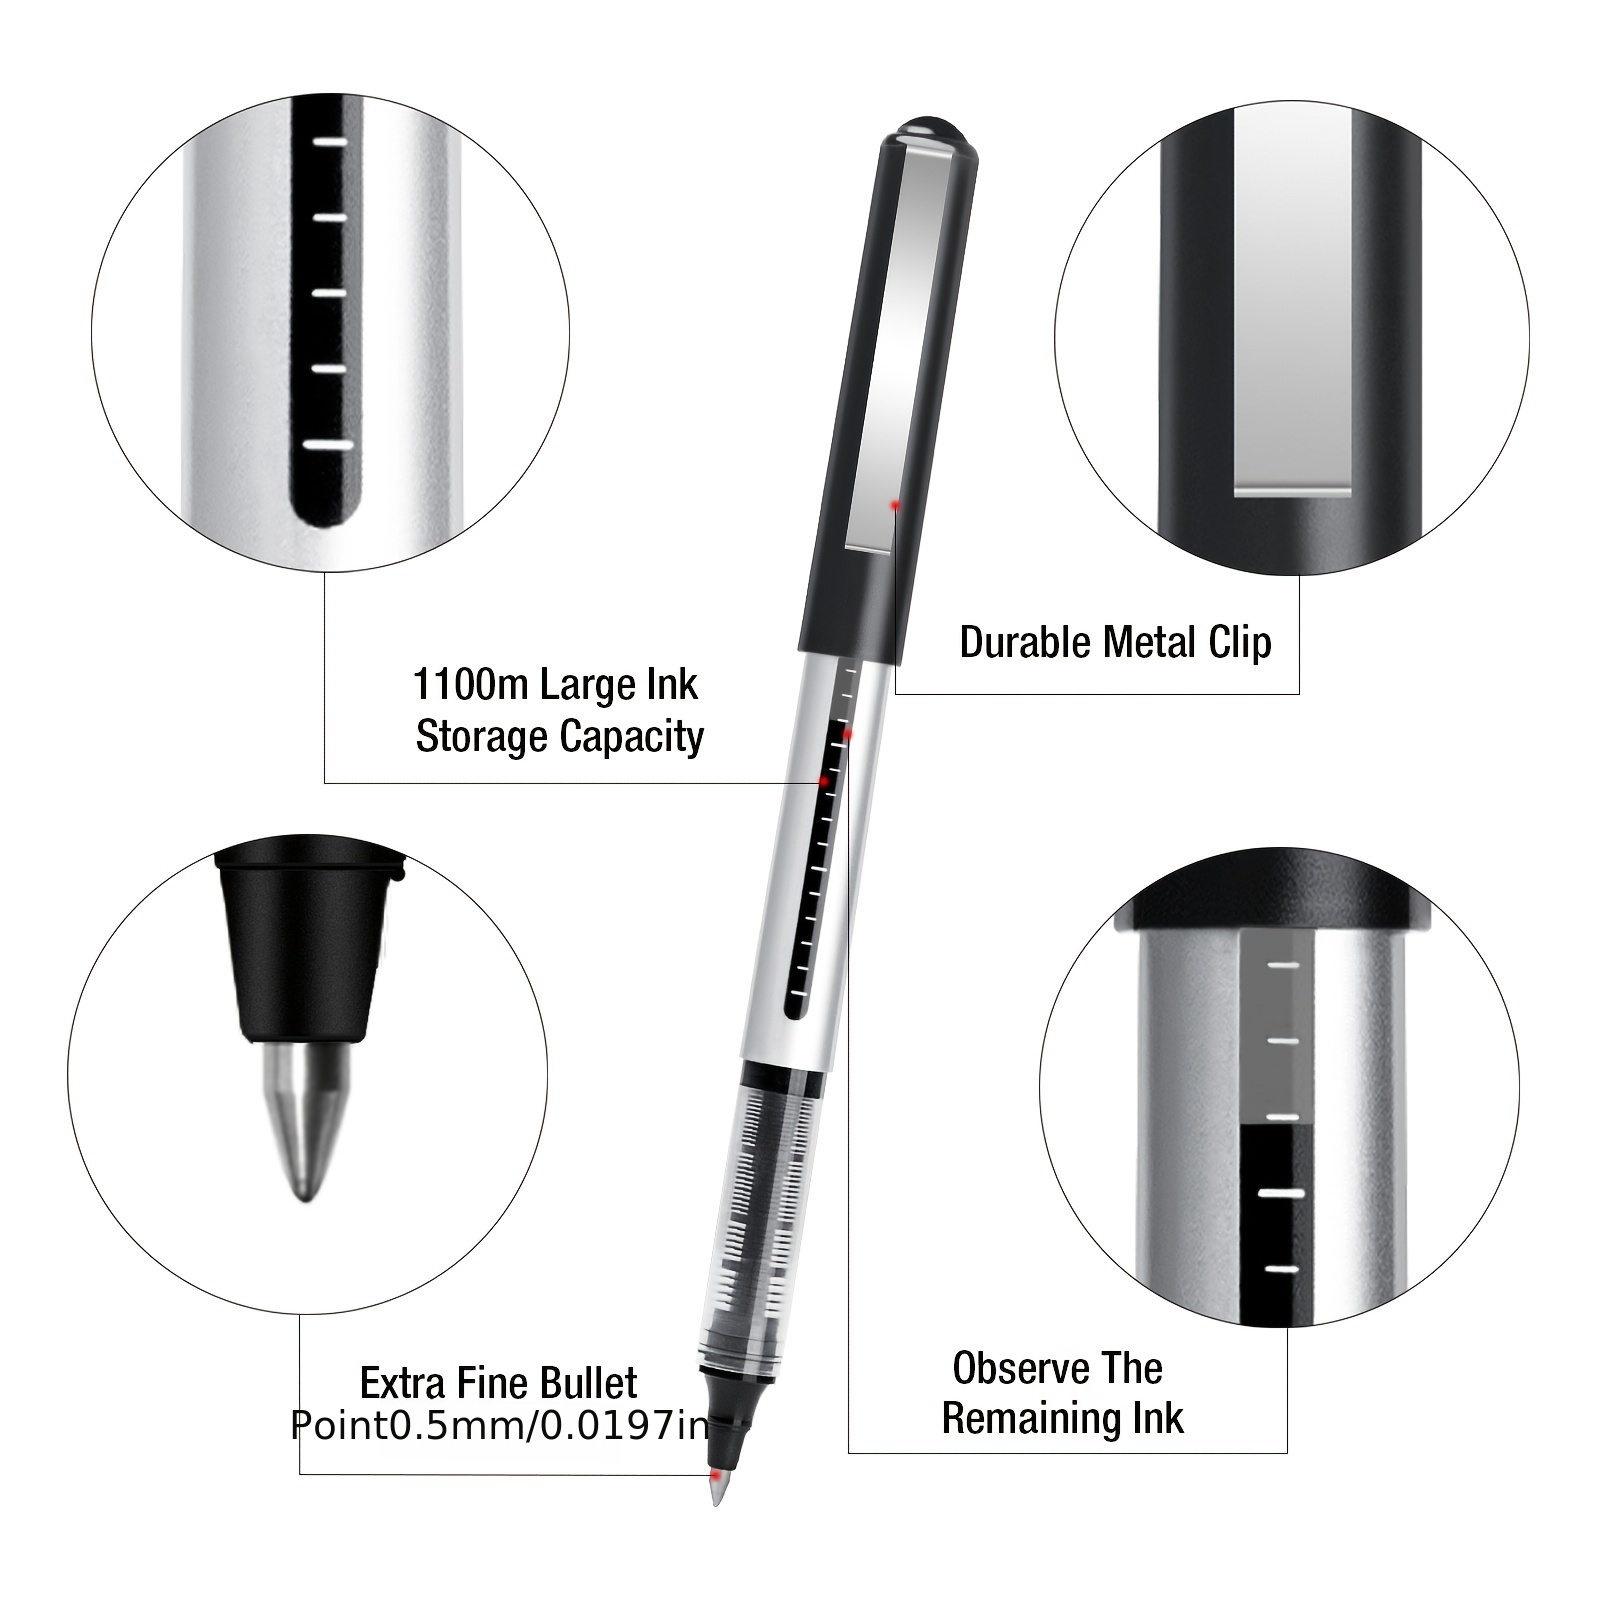 Rollerball Pen Fine Point Pens: 16pack 0.5mm Black Gel Liquid Ink Pens  Extra Thin Fine Tip Pens, Rolling Ball Point Writing Pens